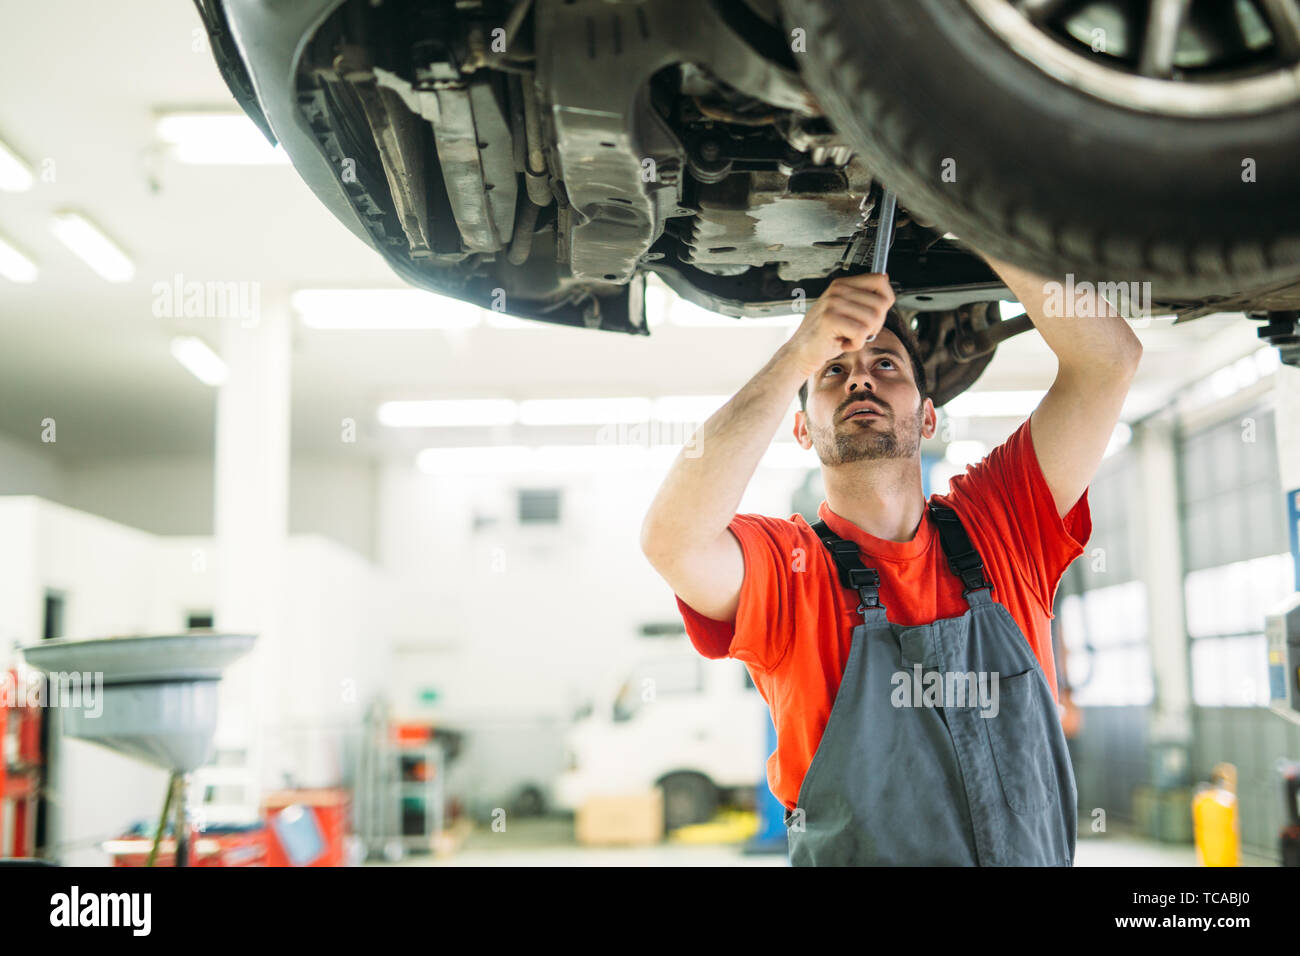 car service, repair, maintenance and people concept - happy smiling auto mechanic man at workshop Stock Photo